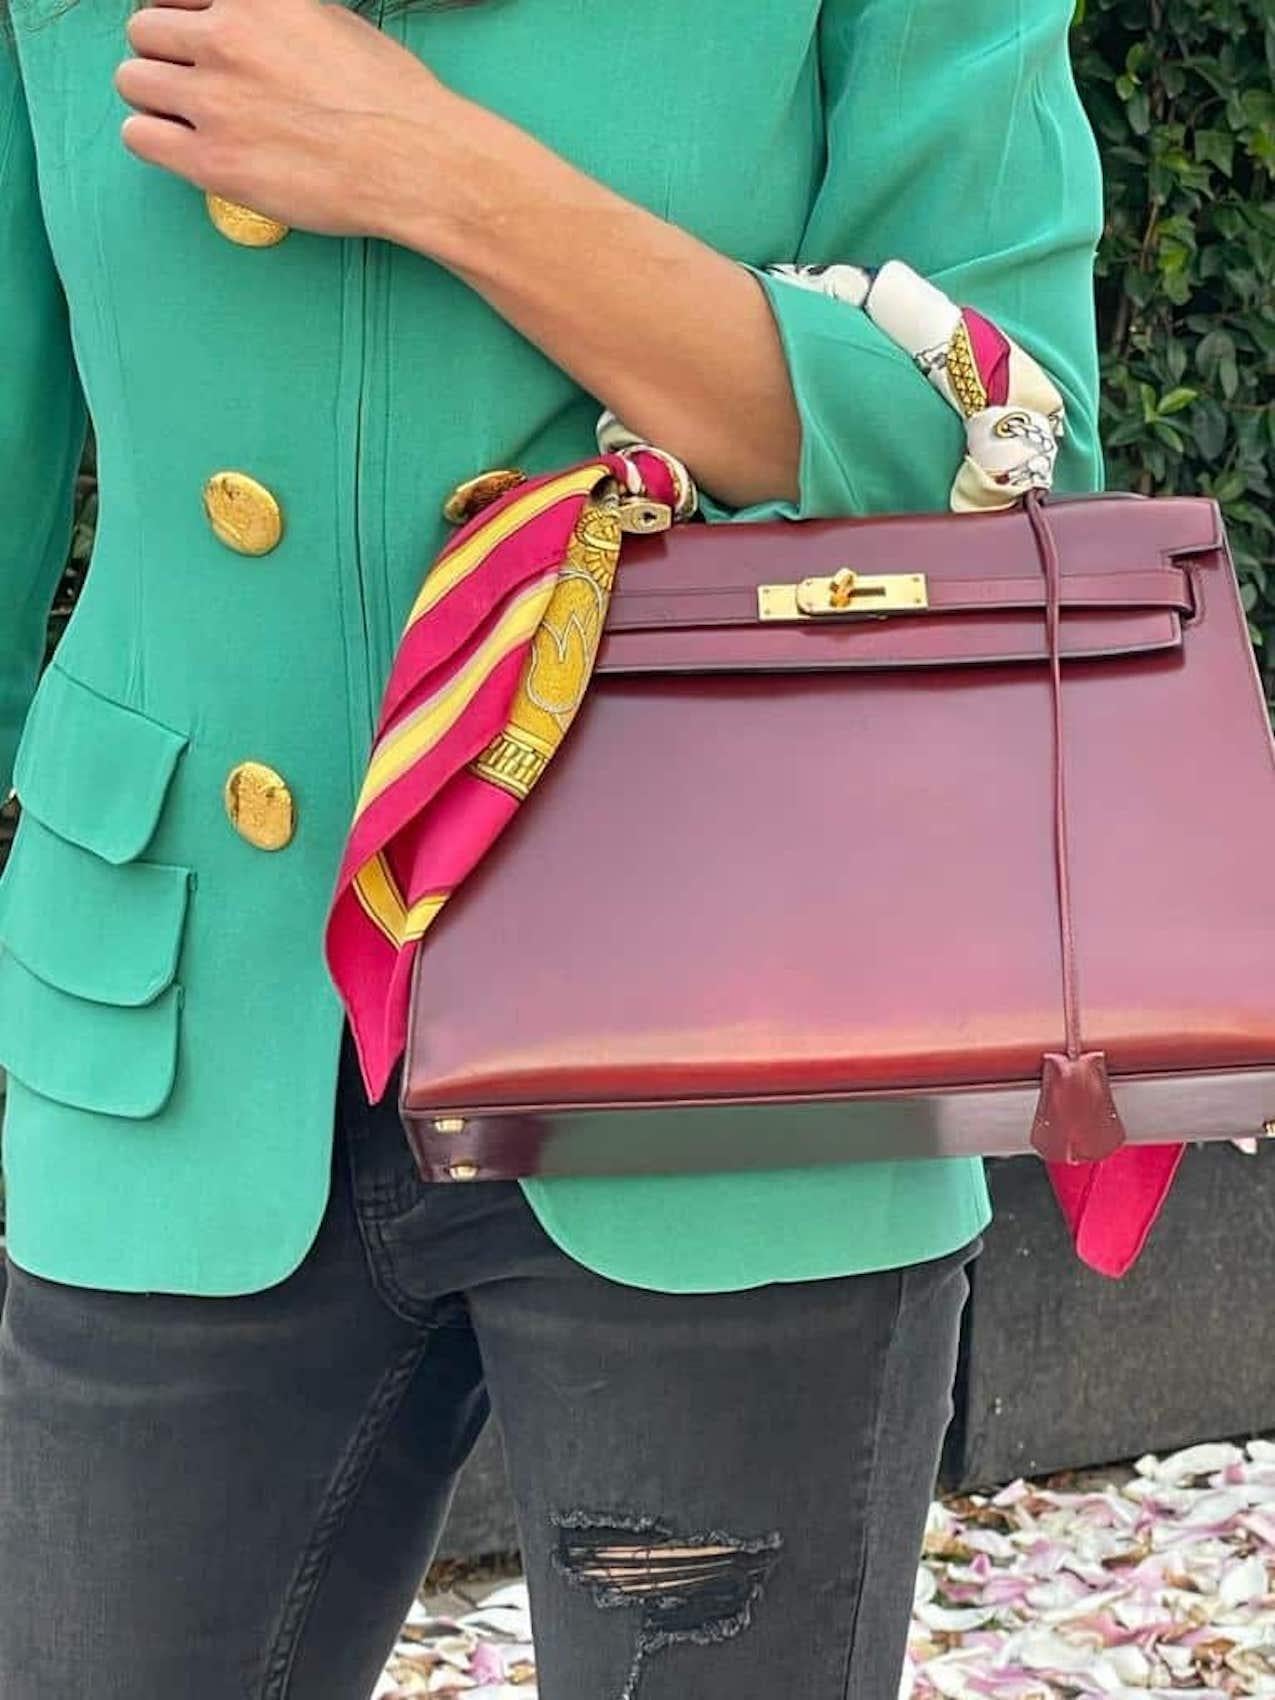 HERMÈS Vintage Kelly Sellier 32 Box Calfskin Iconic 1970s Rouge H
Vintage 1970s-1980s rare iconic Hermès Kelly 32 handbag handcrafted in rare rouge H, red sellier calf box leather with black leather edges. This stunning exclusive vintage Kelly bag